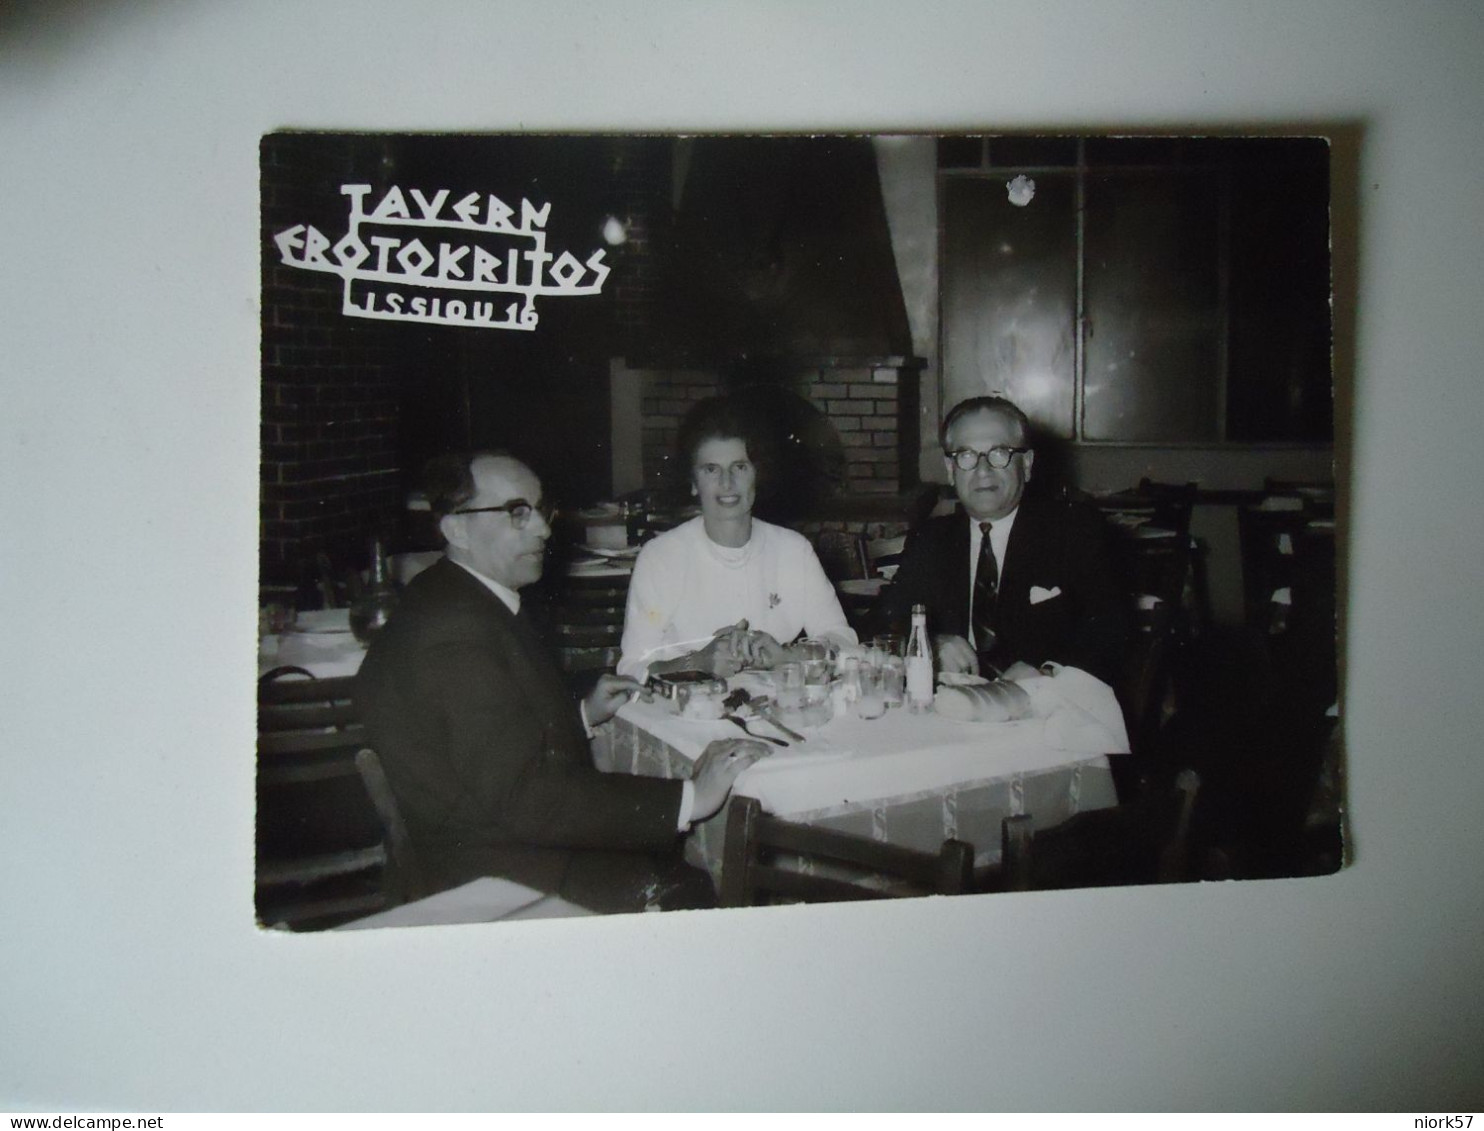 GREECE   POSTCARDS  ΤΑΒΕΡΝΑ ΕΡΟΤΟΚΡΙΤΟΣ 1965  FOR MORE PURCHASES 10% DISCOUNT - Grèce